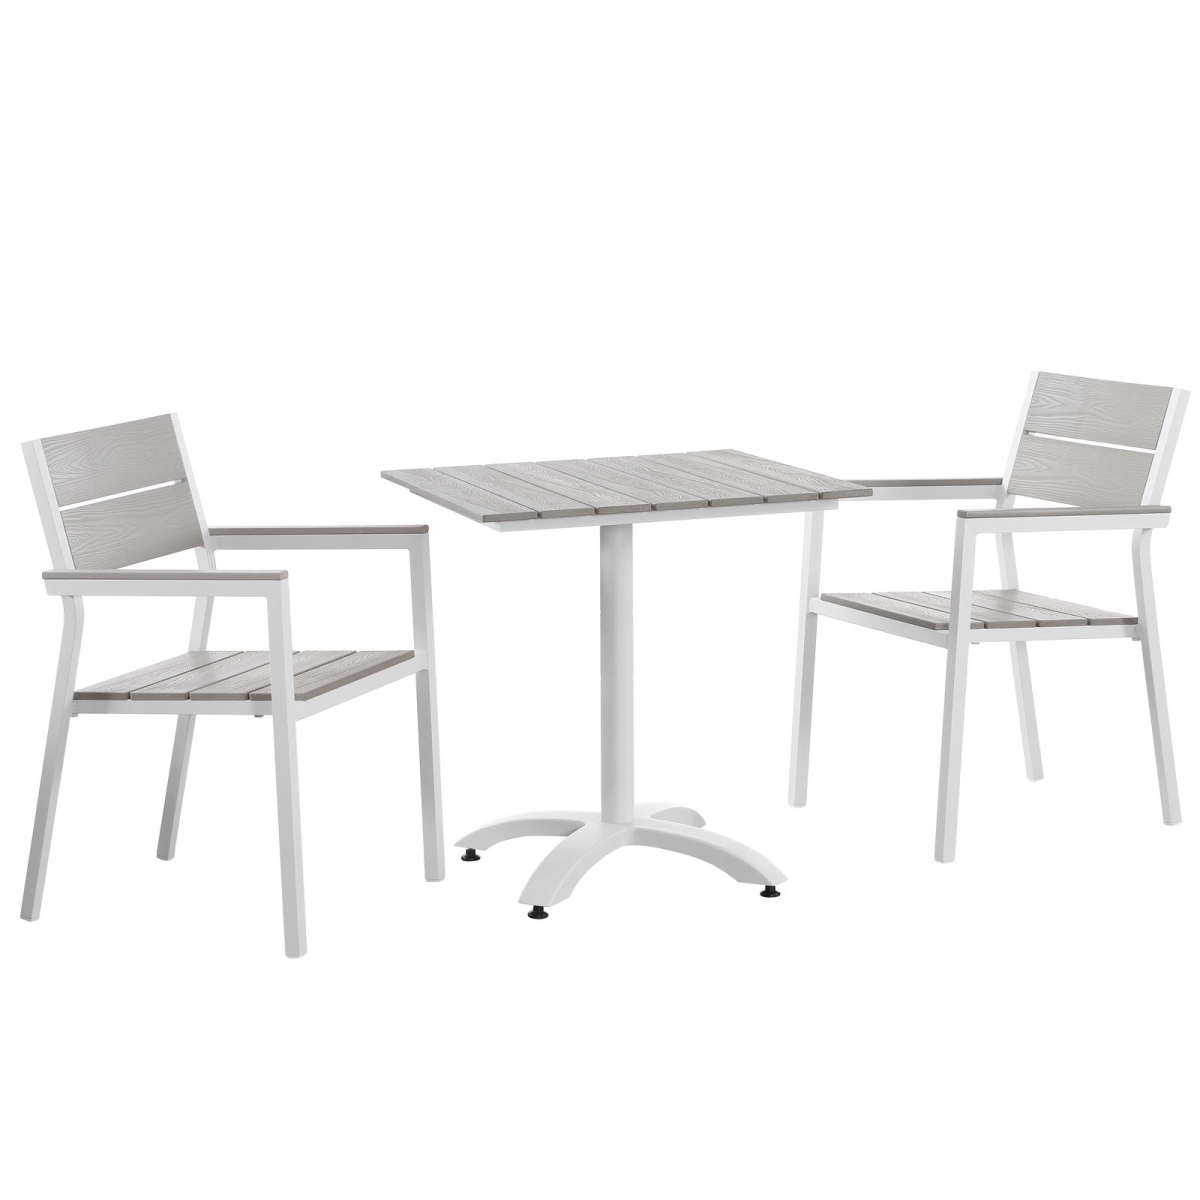 Eastend Eei-1759-whi-lgr-set 3 Piece Maine Outdoor Patio Dining Set Gray Plywood With White Aluminum Frame